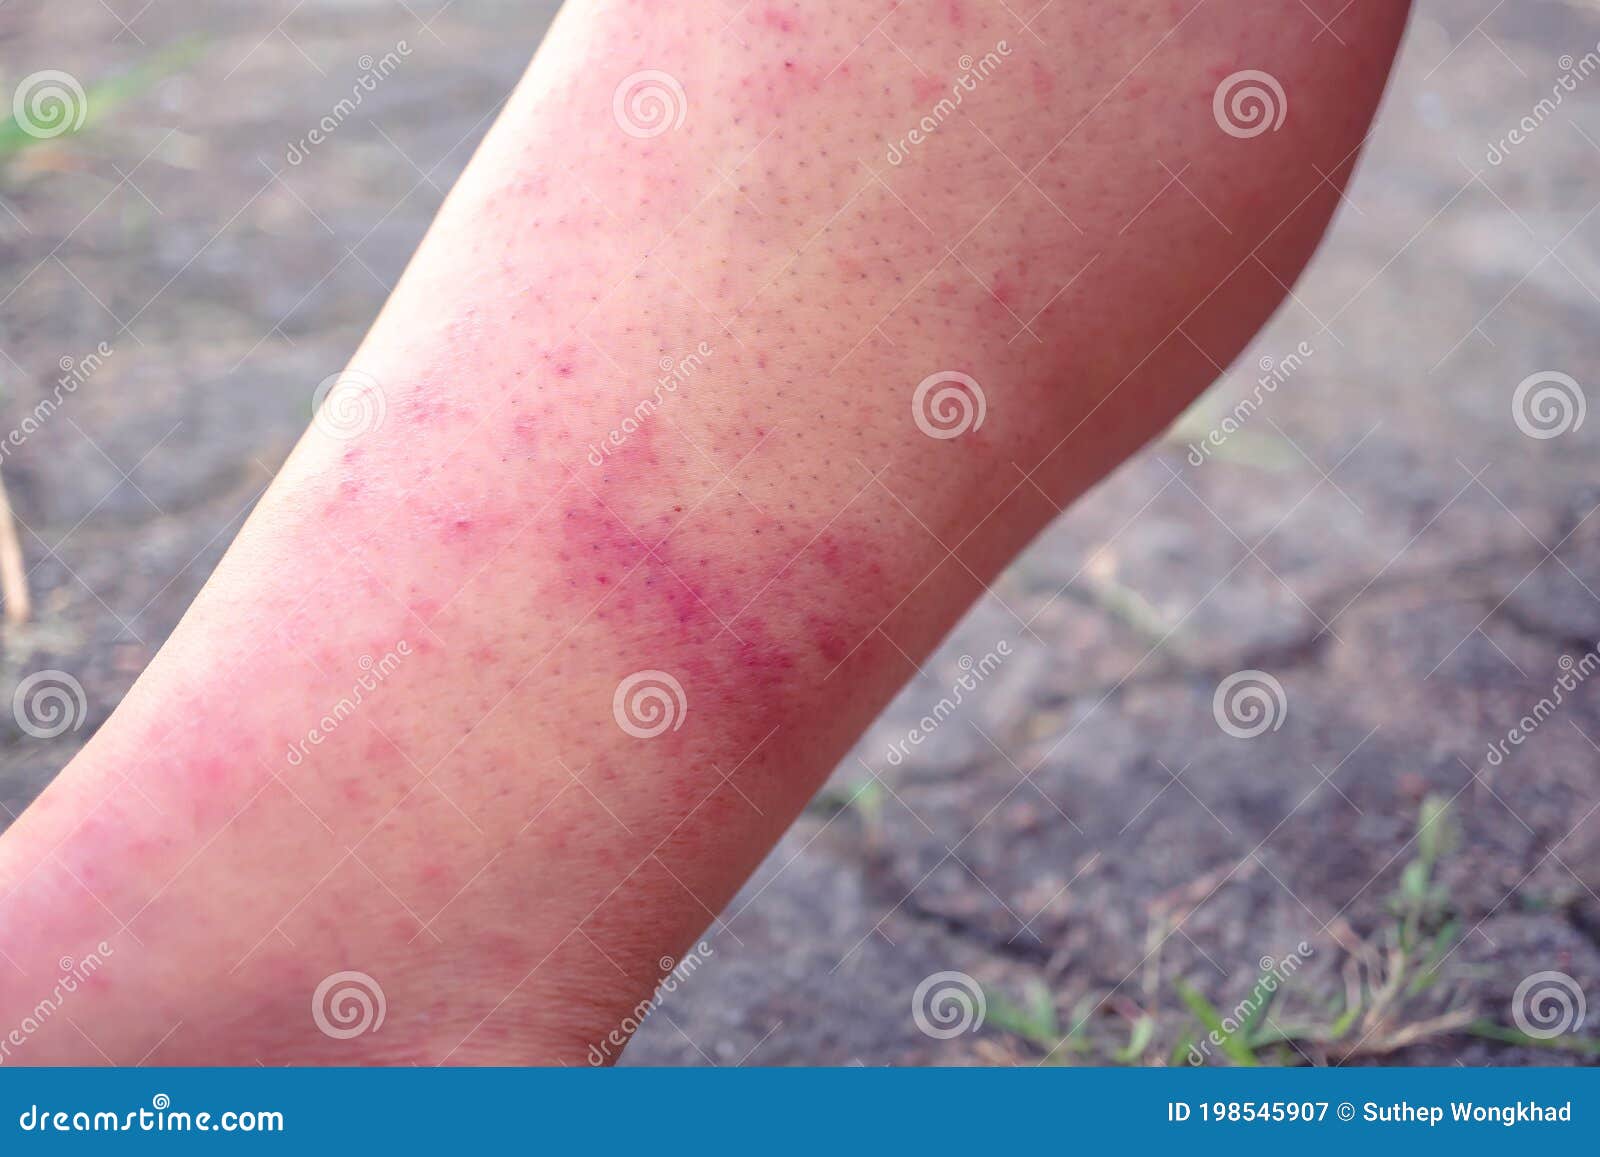 dermatitis and vesicles, dermatitis from measles virus, dermatitis due to urticaria, health problems, allergies, redness on the le